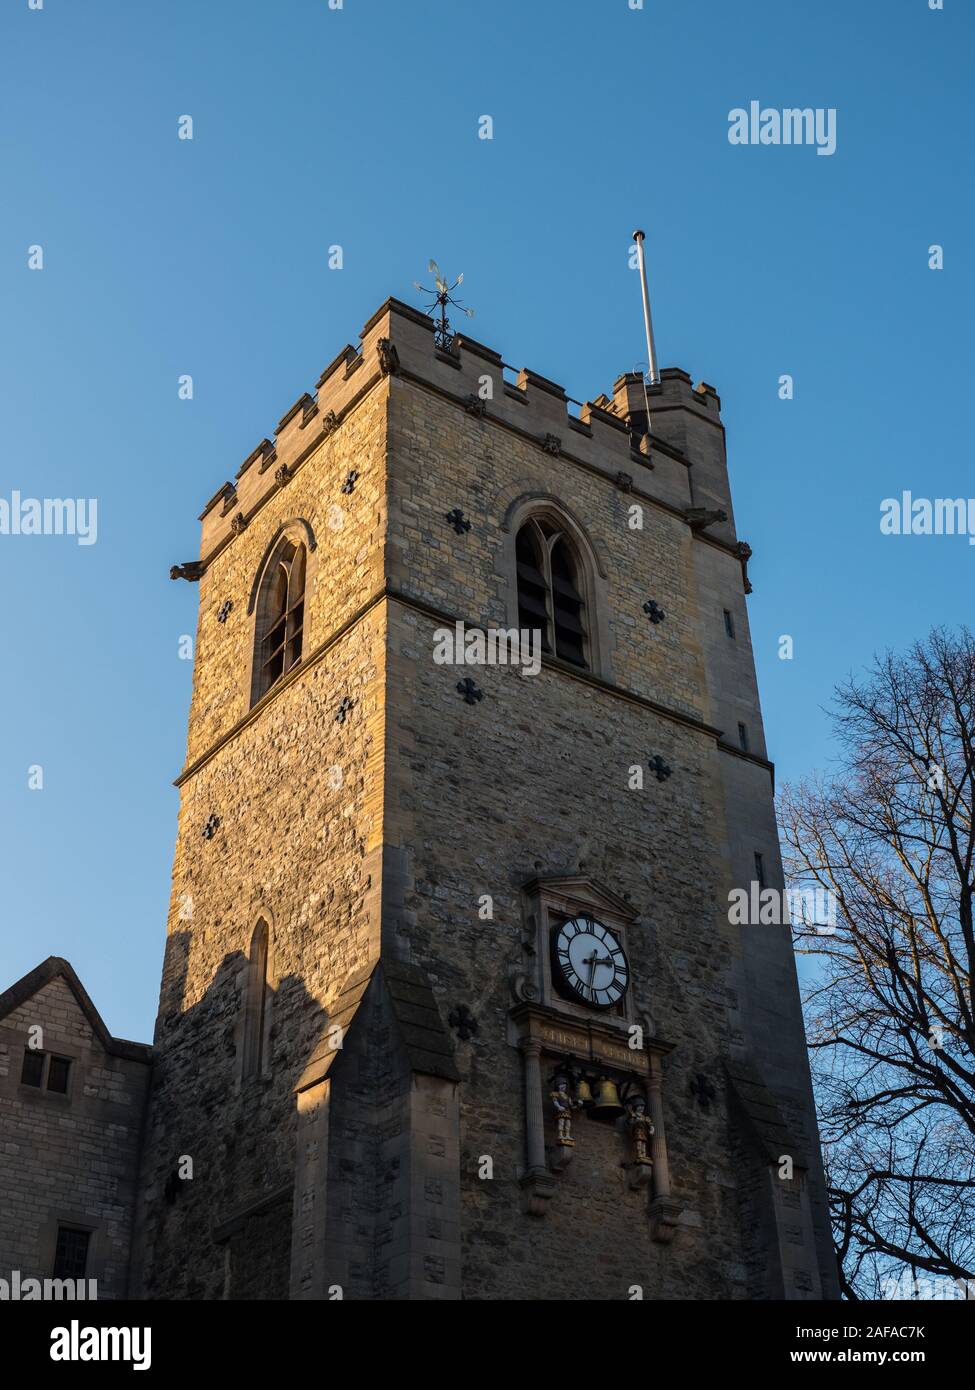 Carfax Tower, Viewpoint, Oxford, Oxfordshire, England, UK, GB. Stock Photo